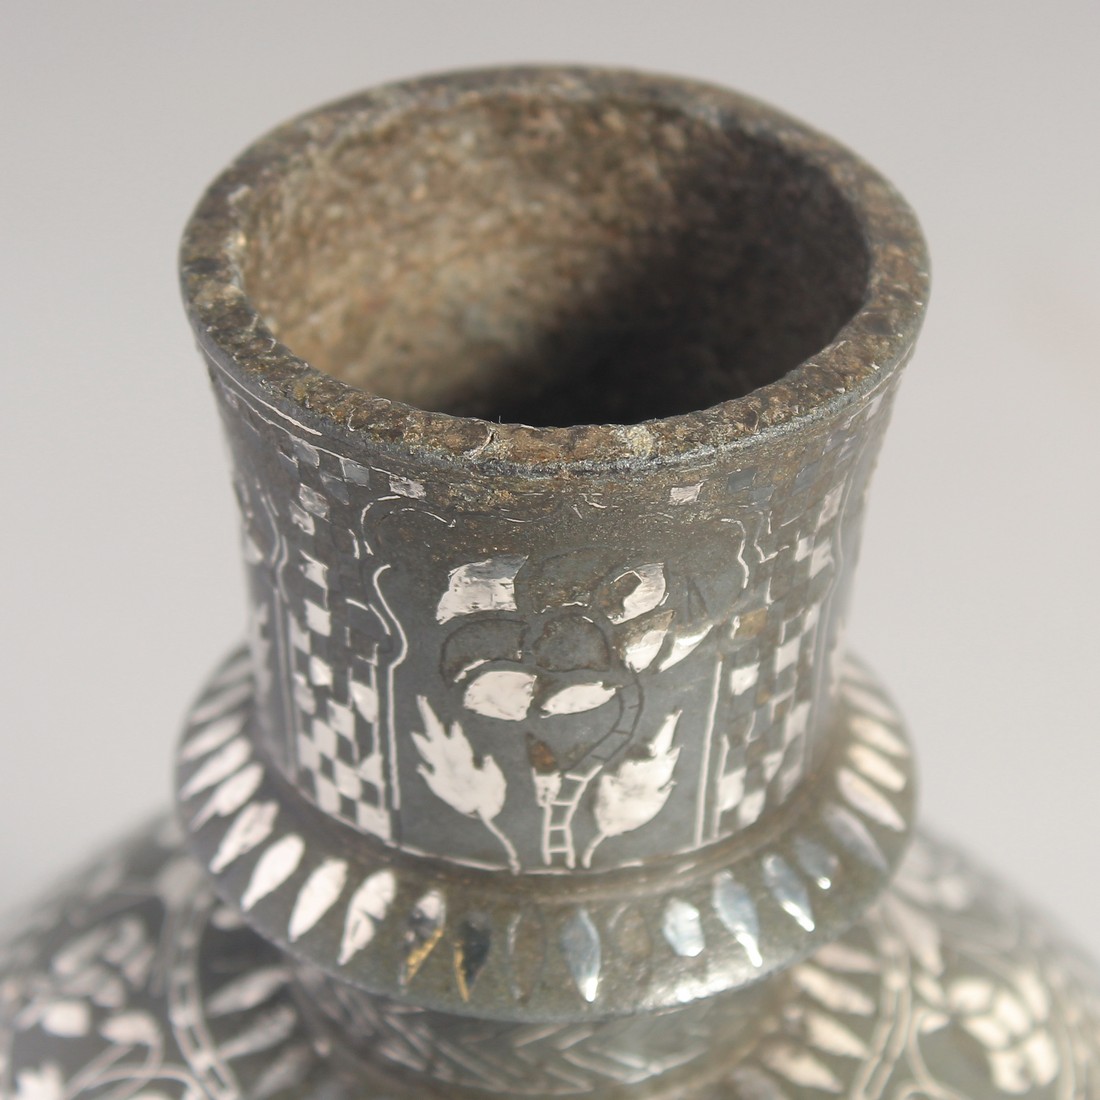 A LARGE 18TH CENTURY INDIAN BIDRI SILVER INLAID HUQQA BASE, with decorative floral panels. 20cm - Image 4 of 5